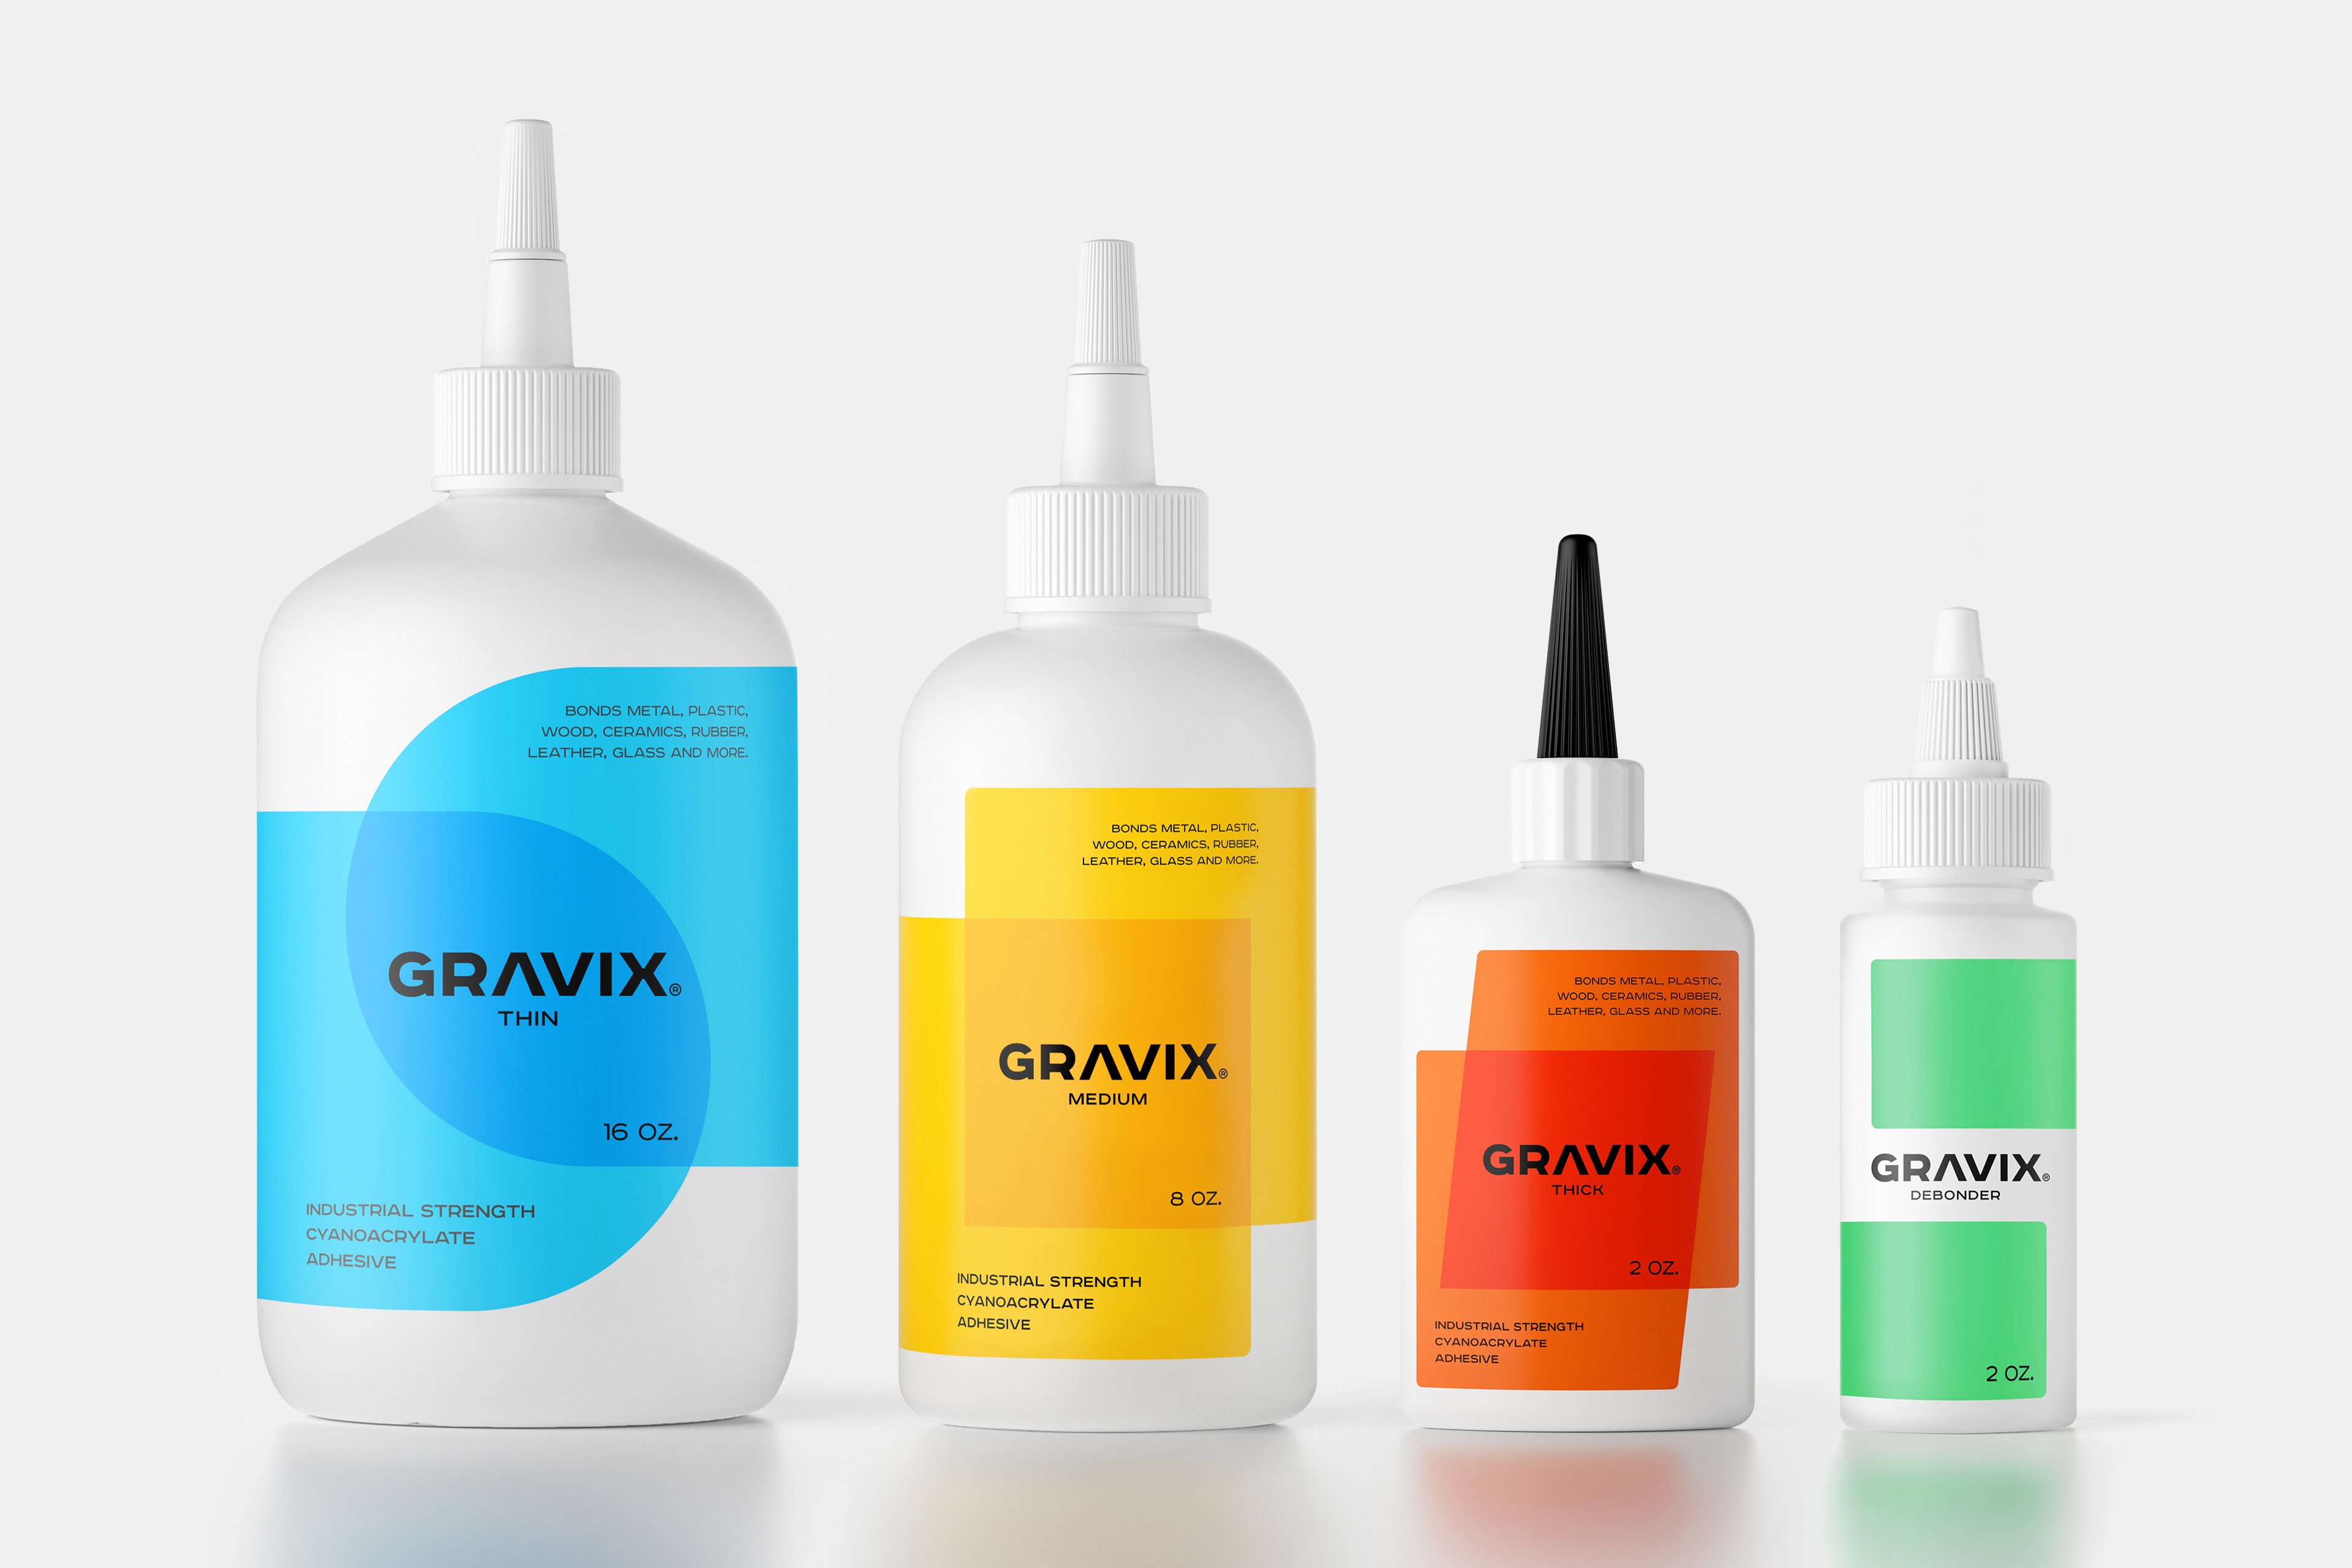 Gravix Glue Packaging and Brand Design by Formascope Agency